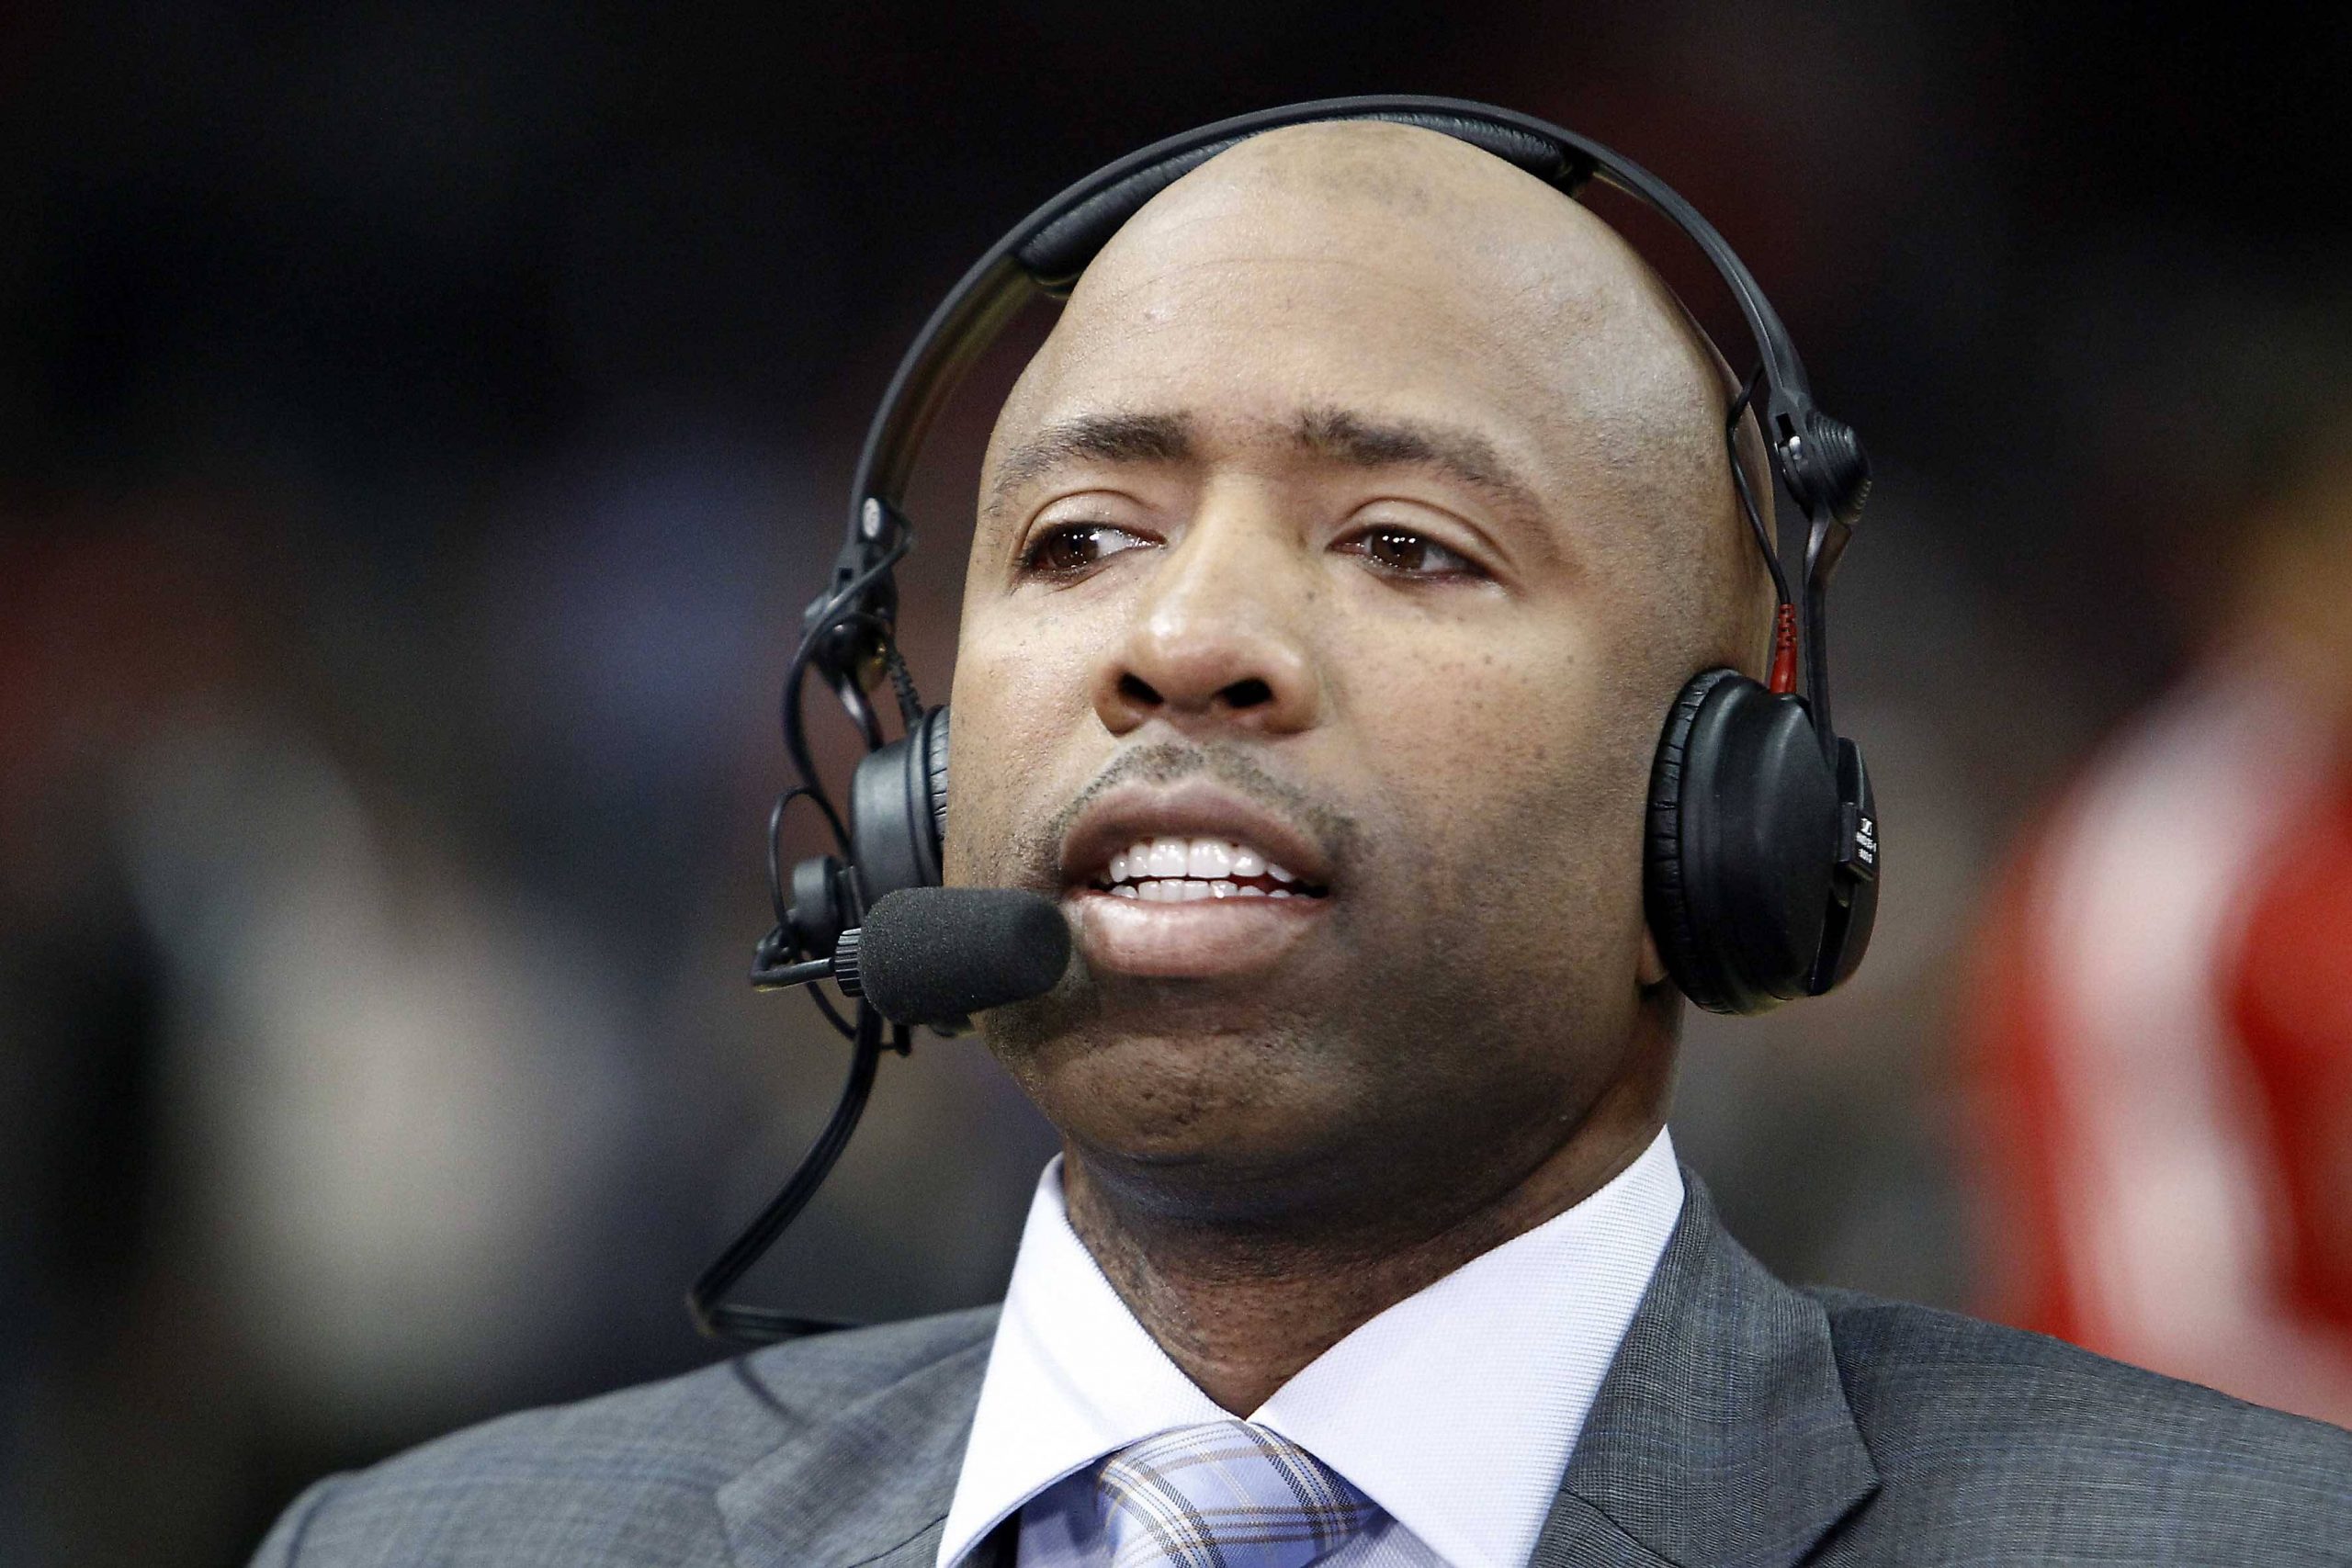 Kenny Smith 2022 Net Worth, Salary, Records, and Endorsements